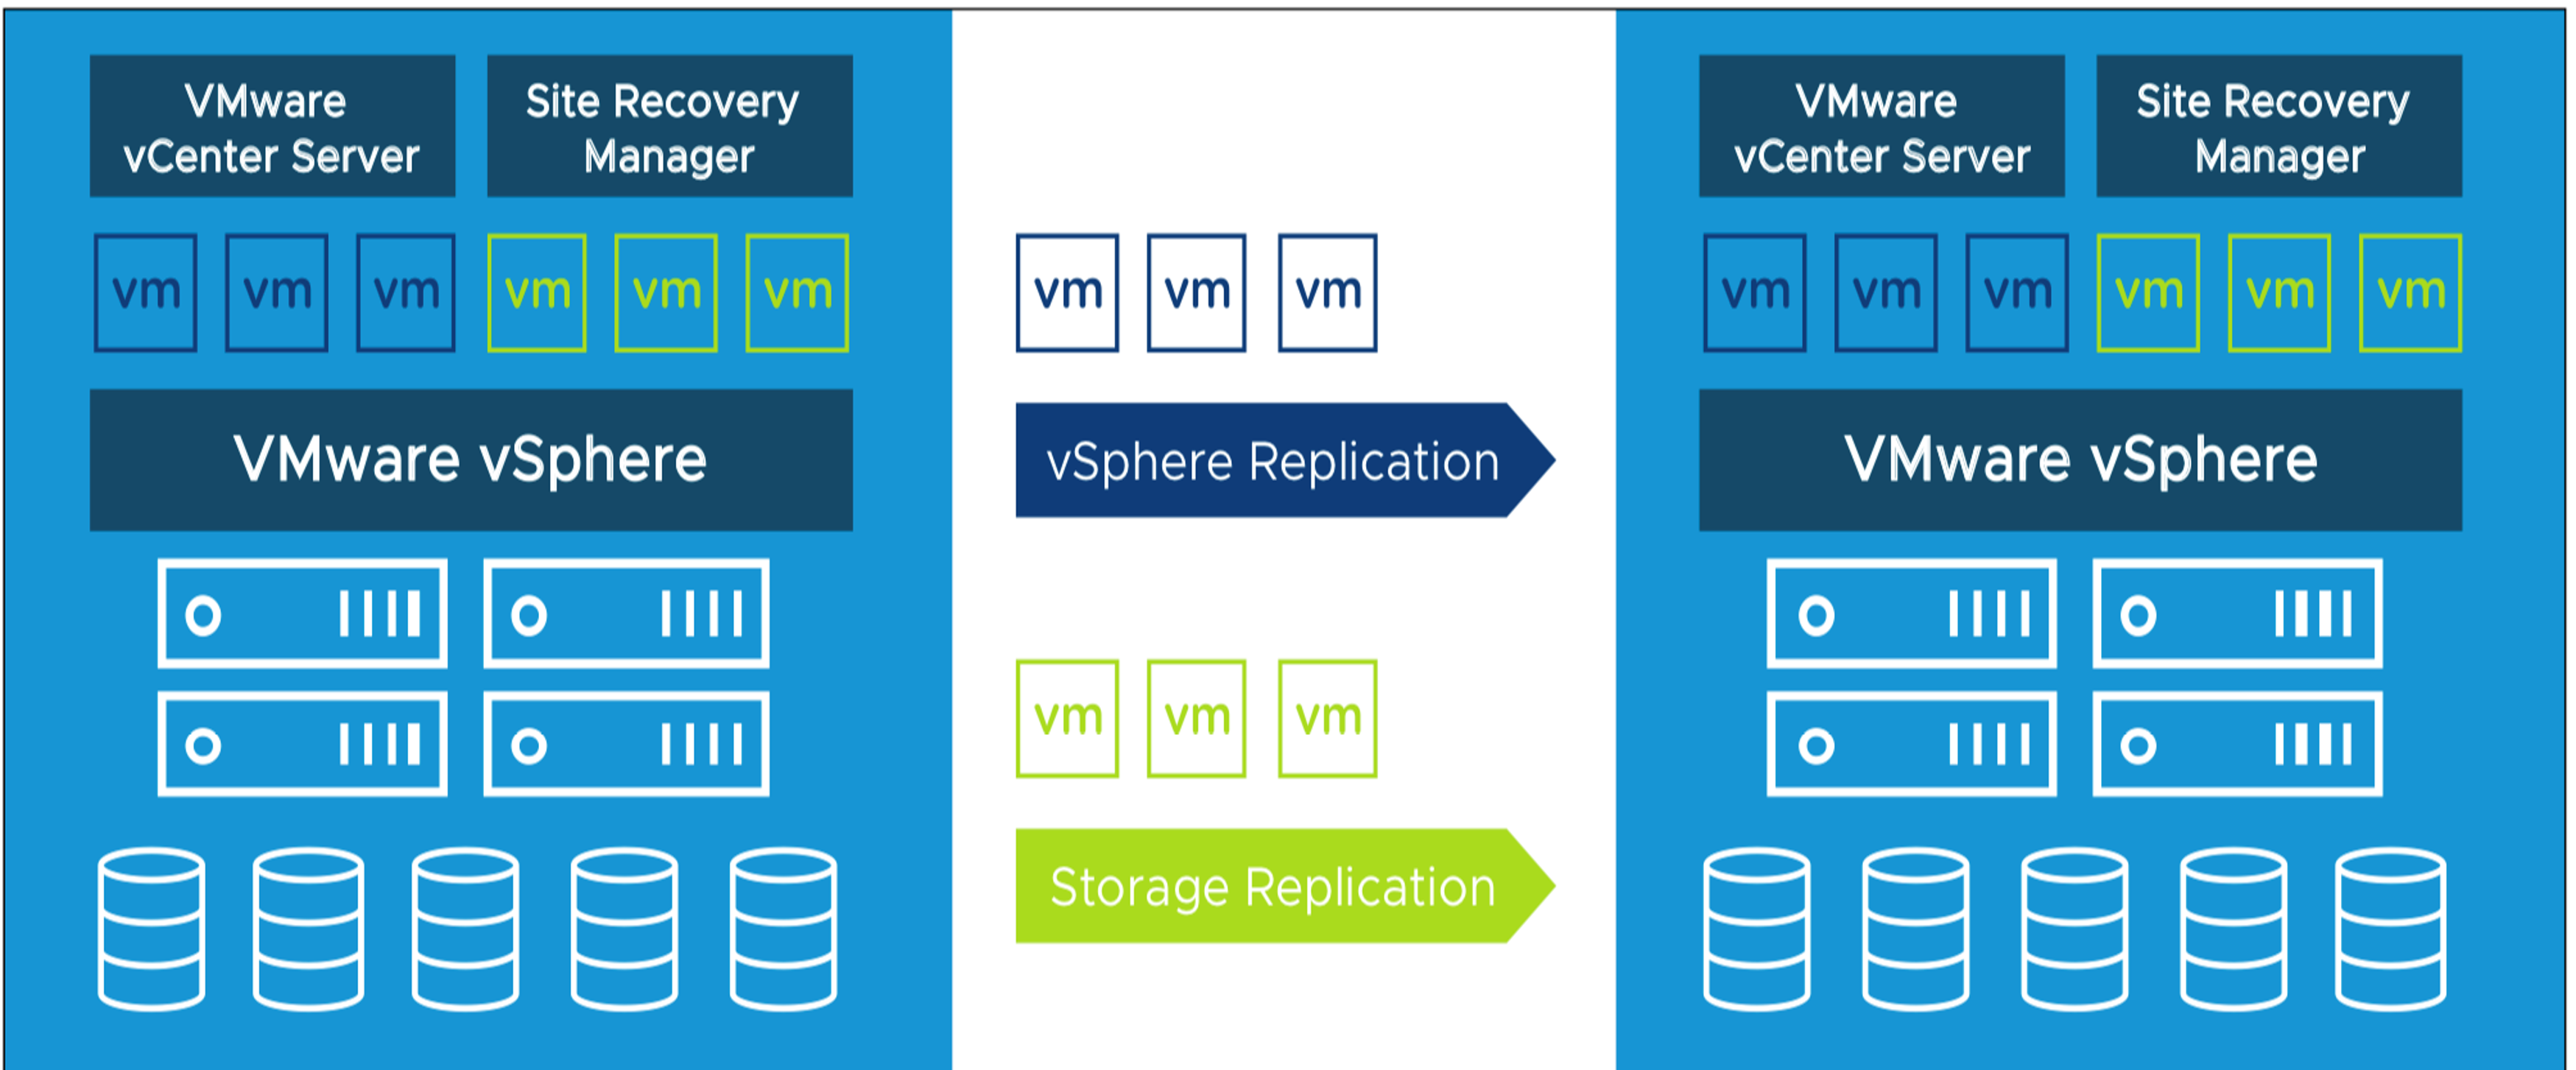 VMware Site Recovery Manager and VMware vSphere Replication